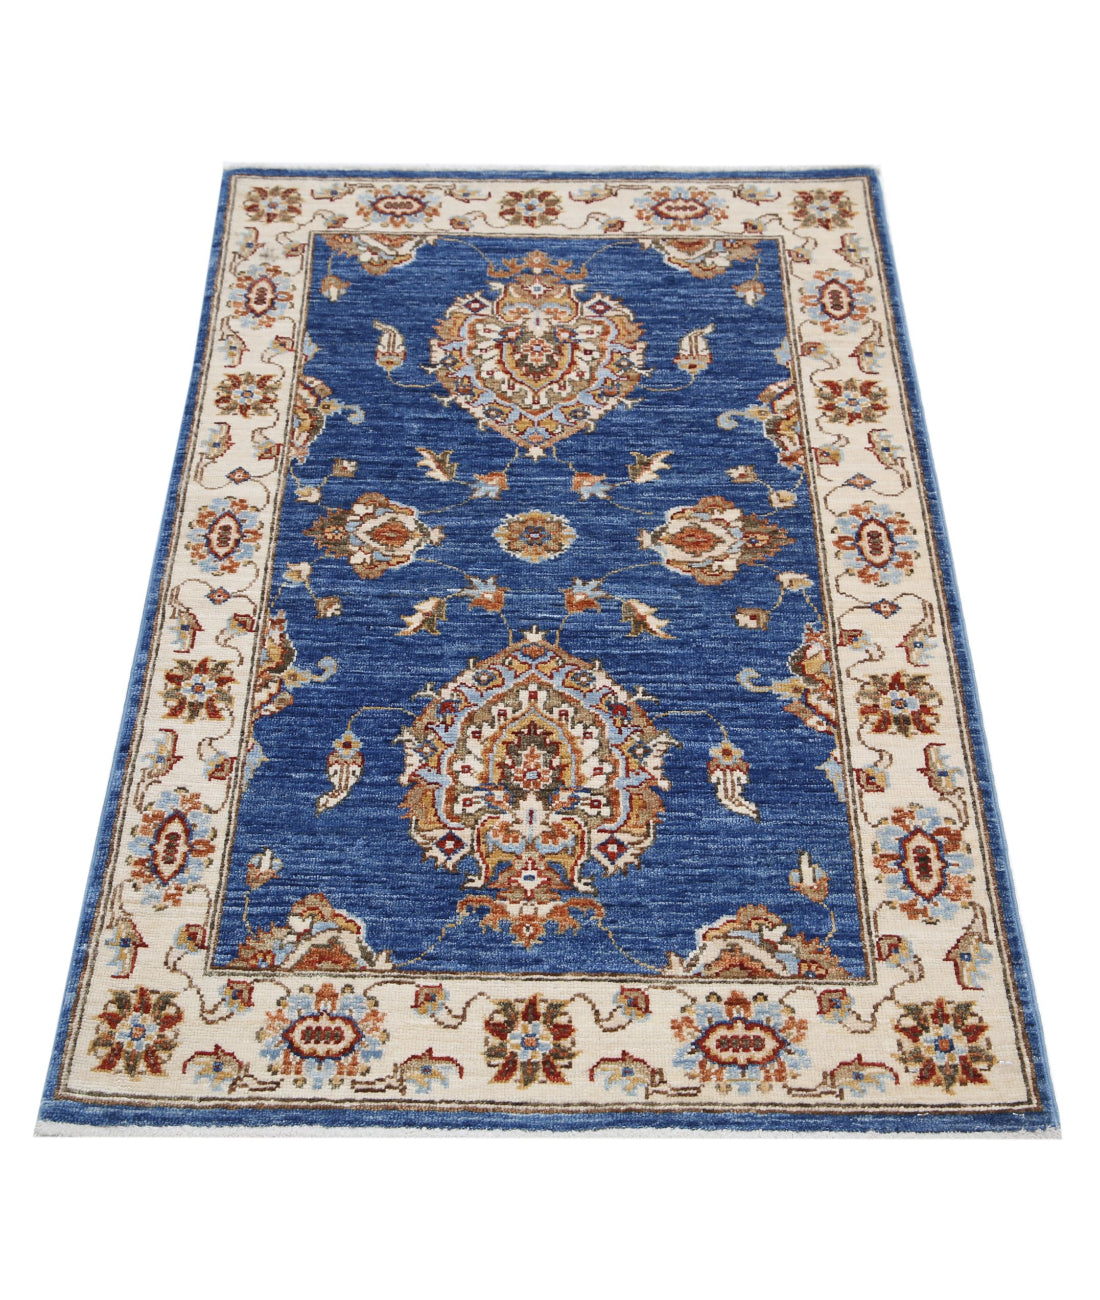 Ziegler 2'6'' X 4'0'' Hand-Knotted Wool Rug 2'6'' x 4'0'' (75 X 120) / Blue / Ivory